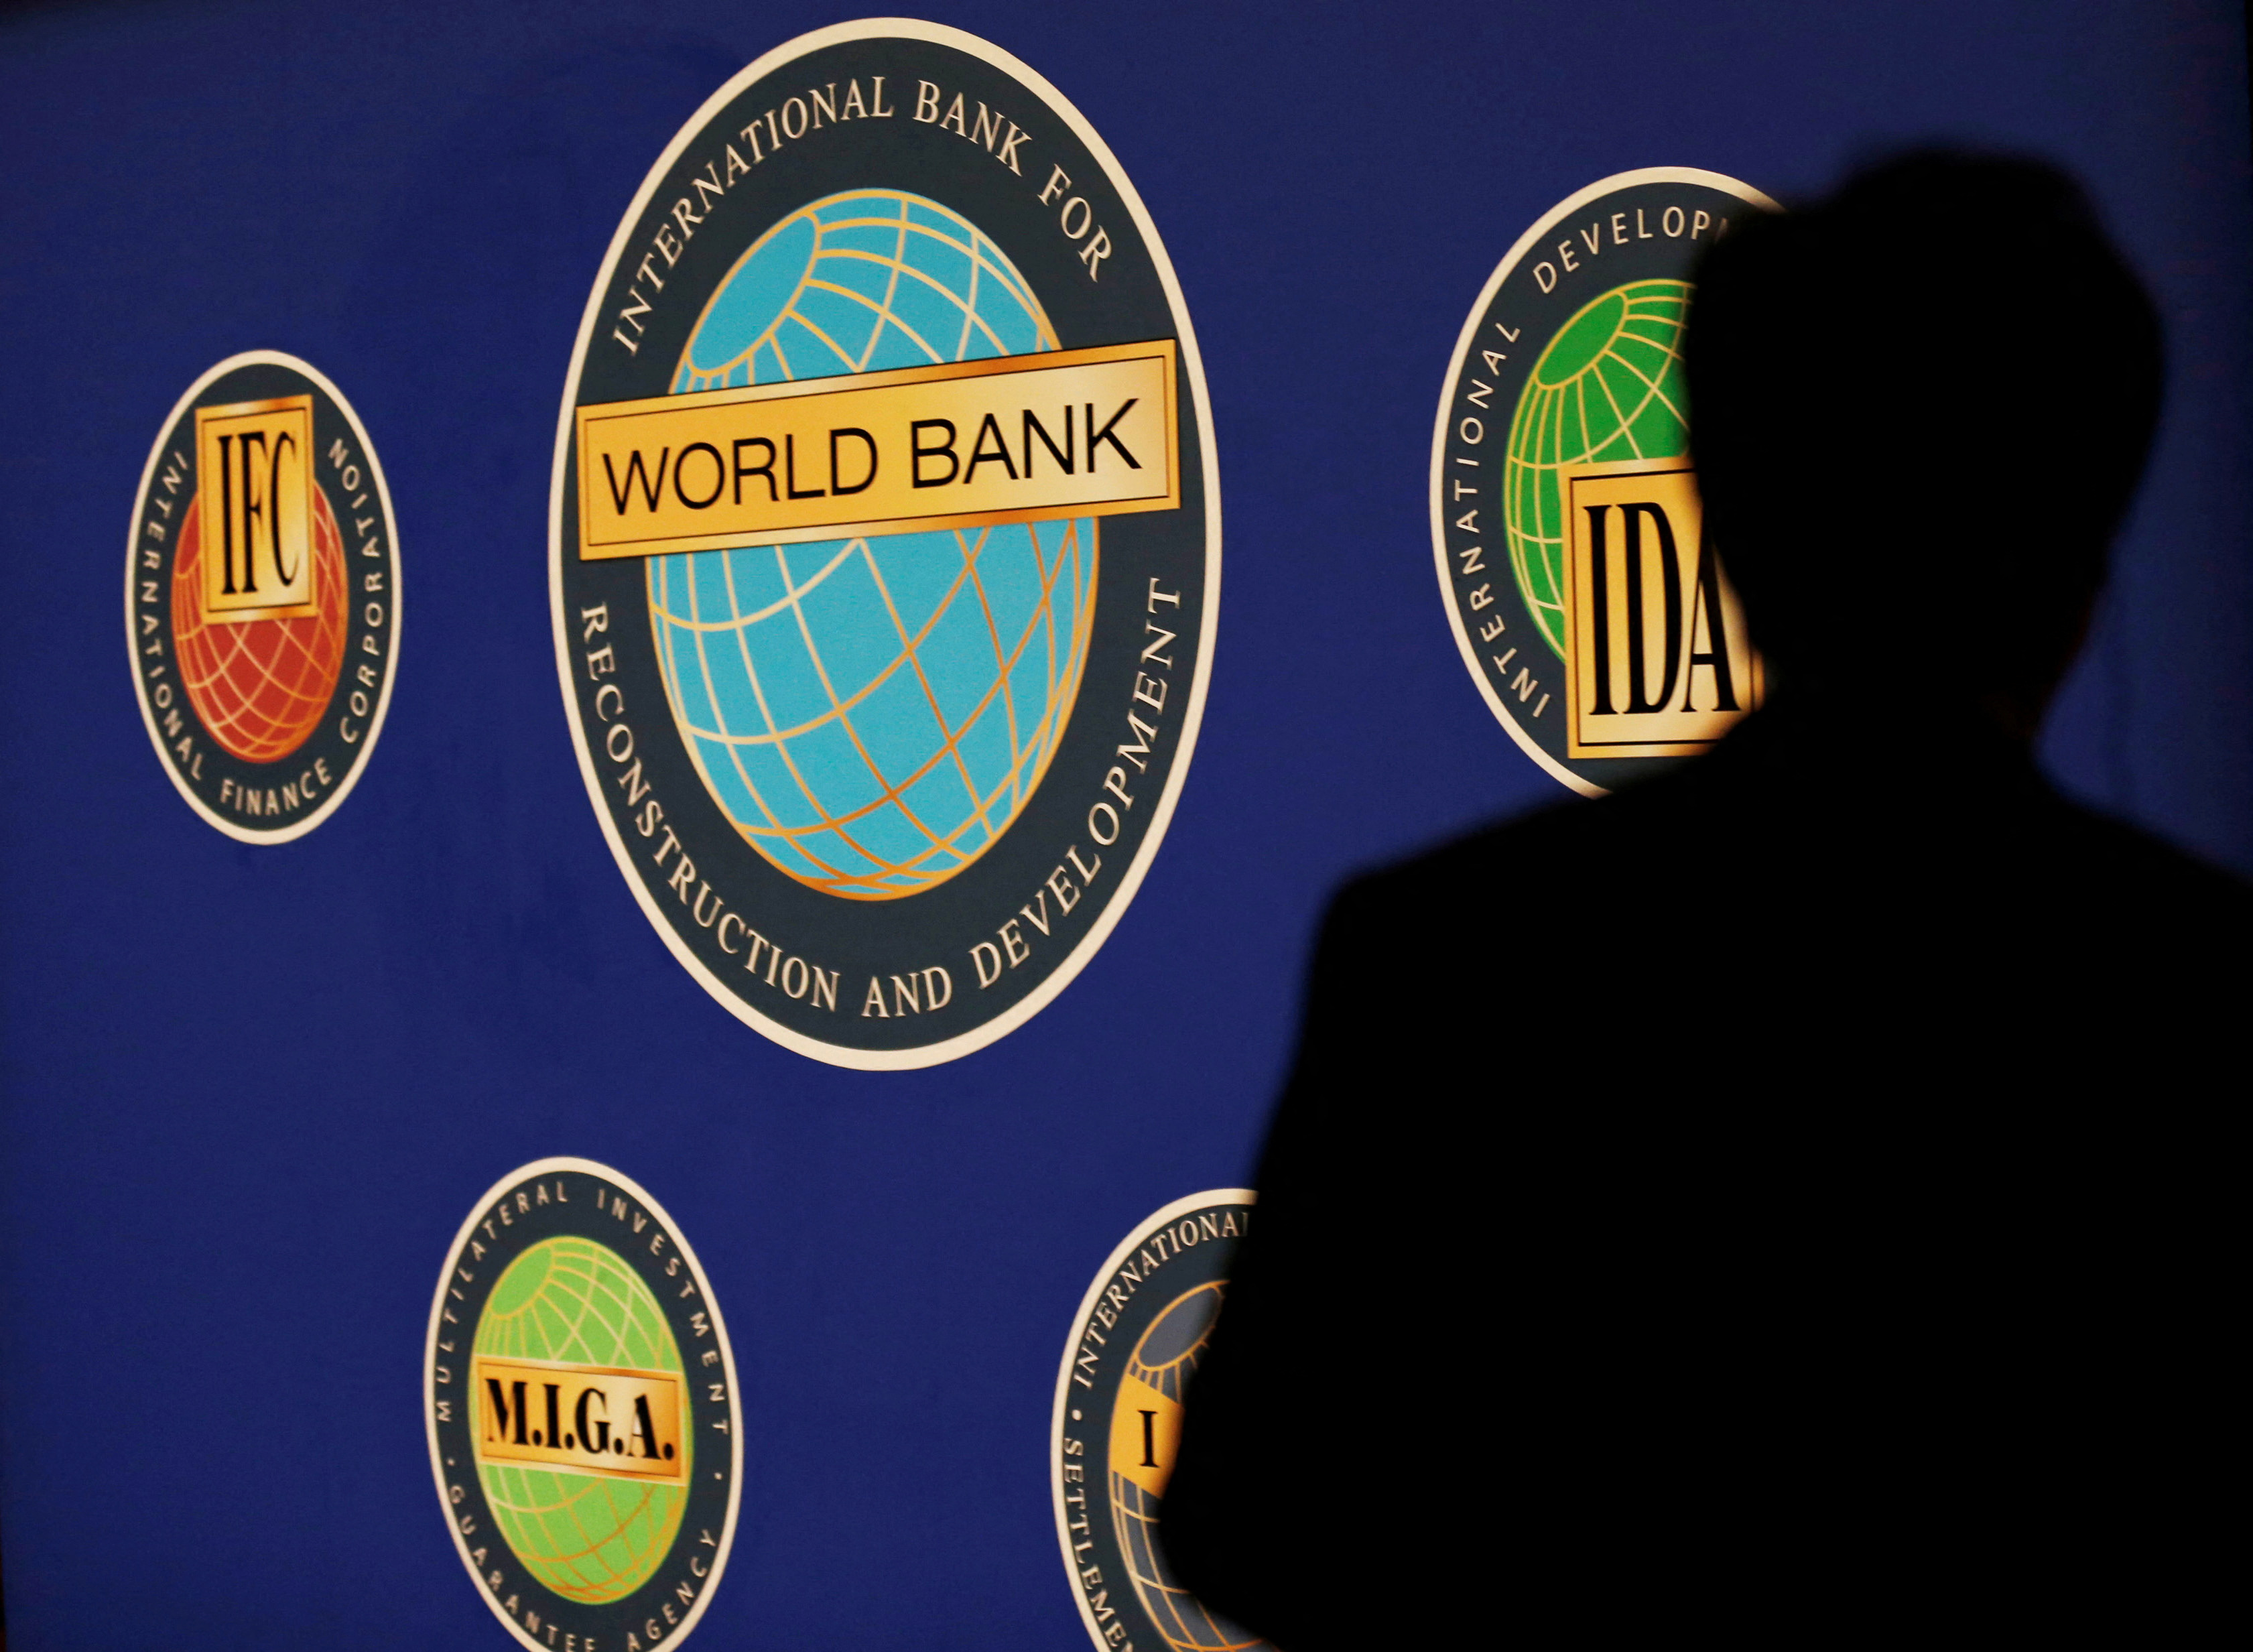 A man is silhouetted against the logo of the World Bank at the main venue for the IMF and World Bank annual meeting in Tokyo